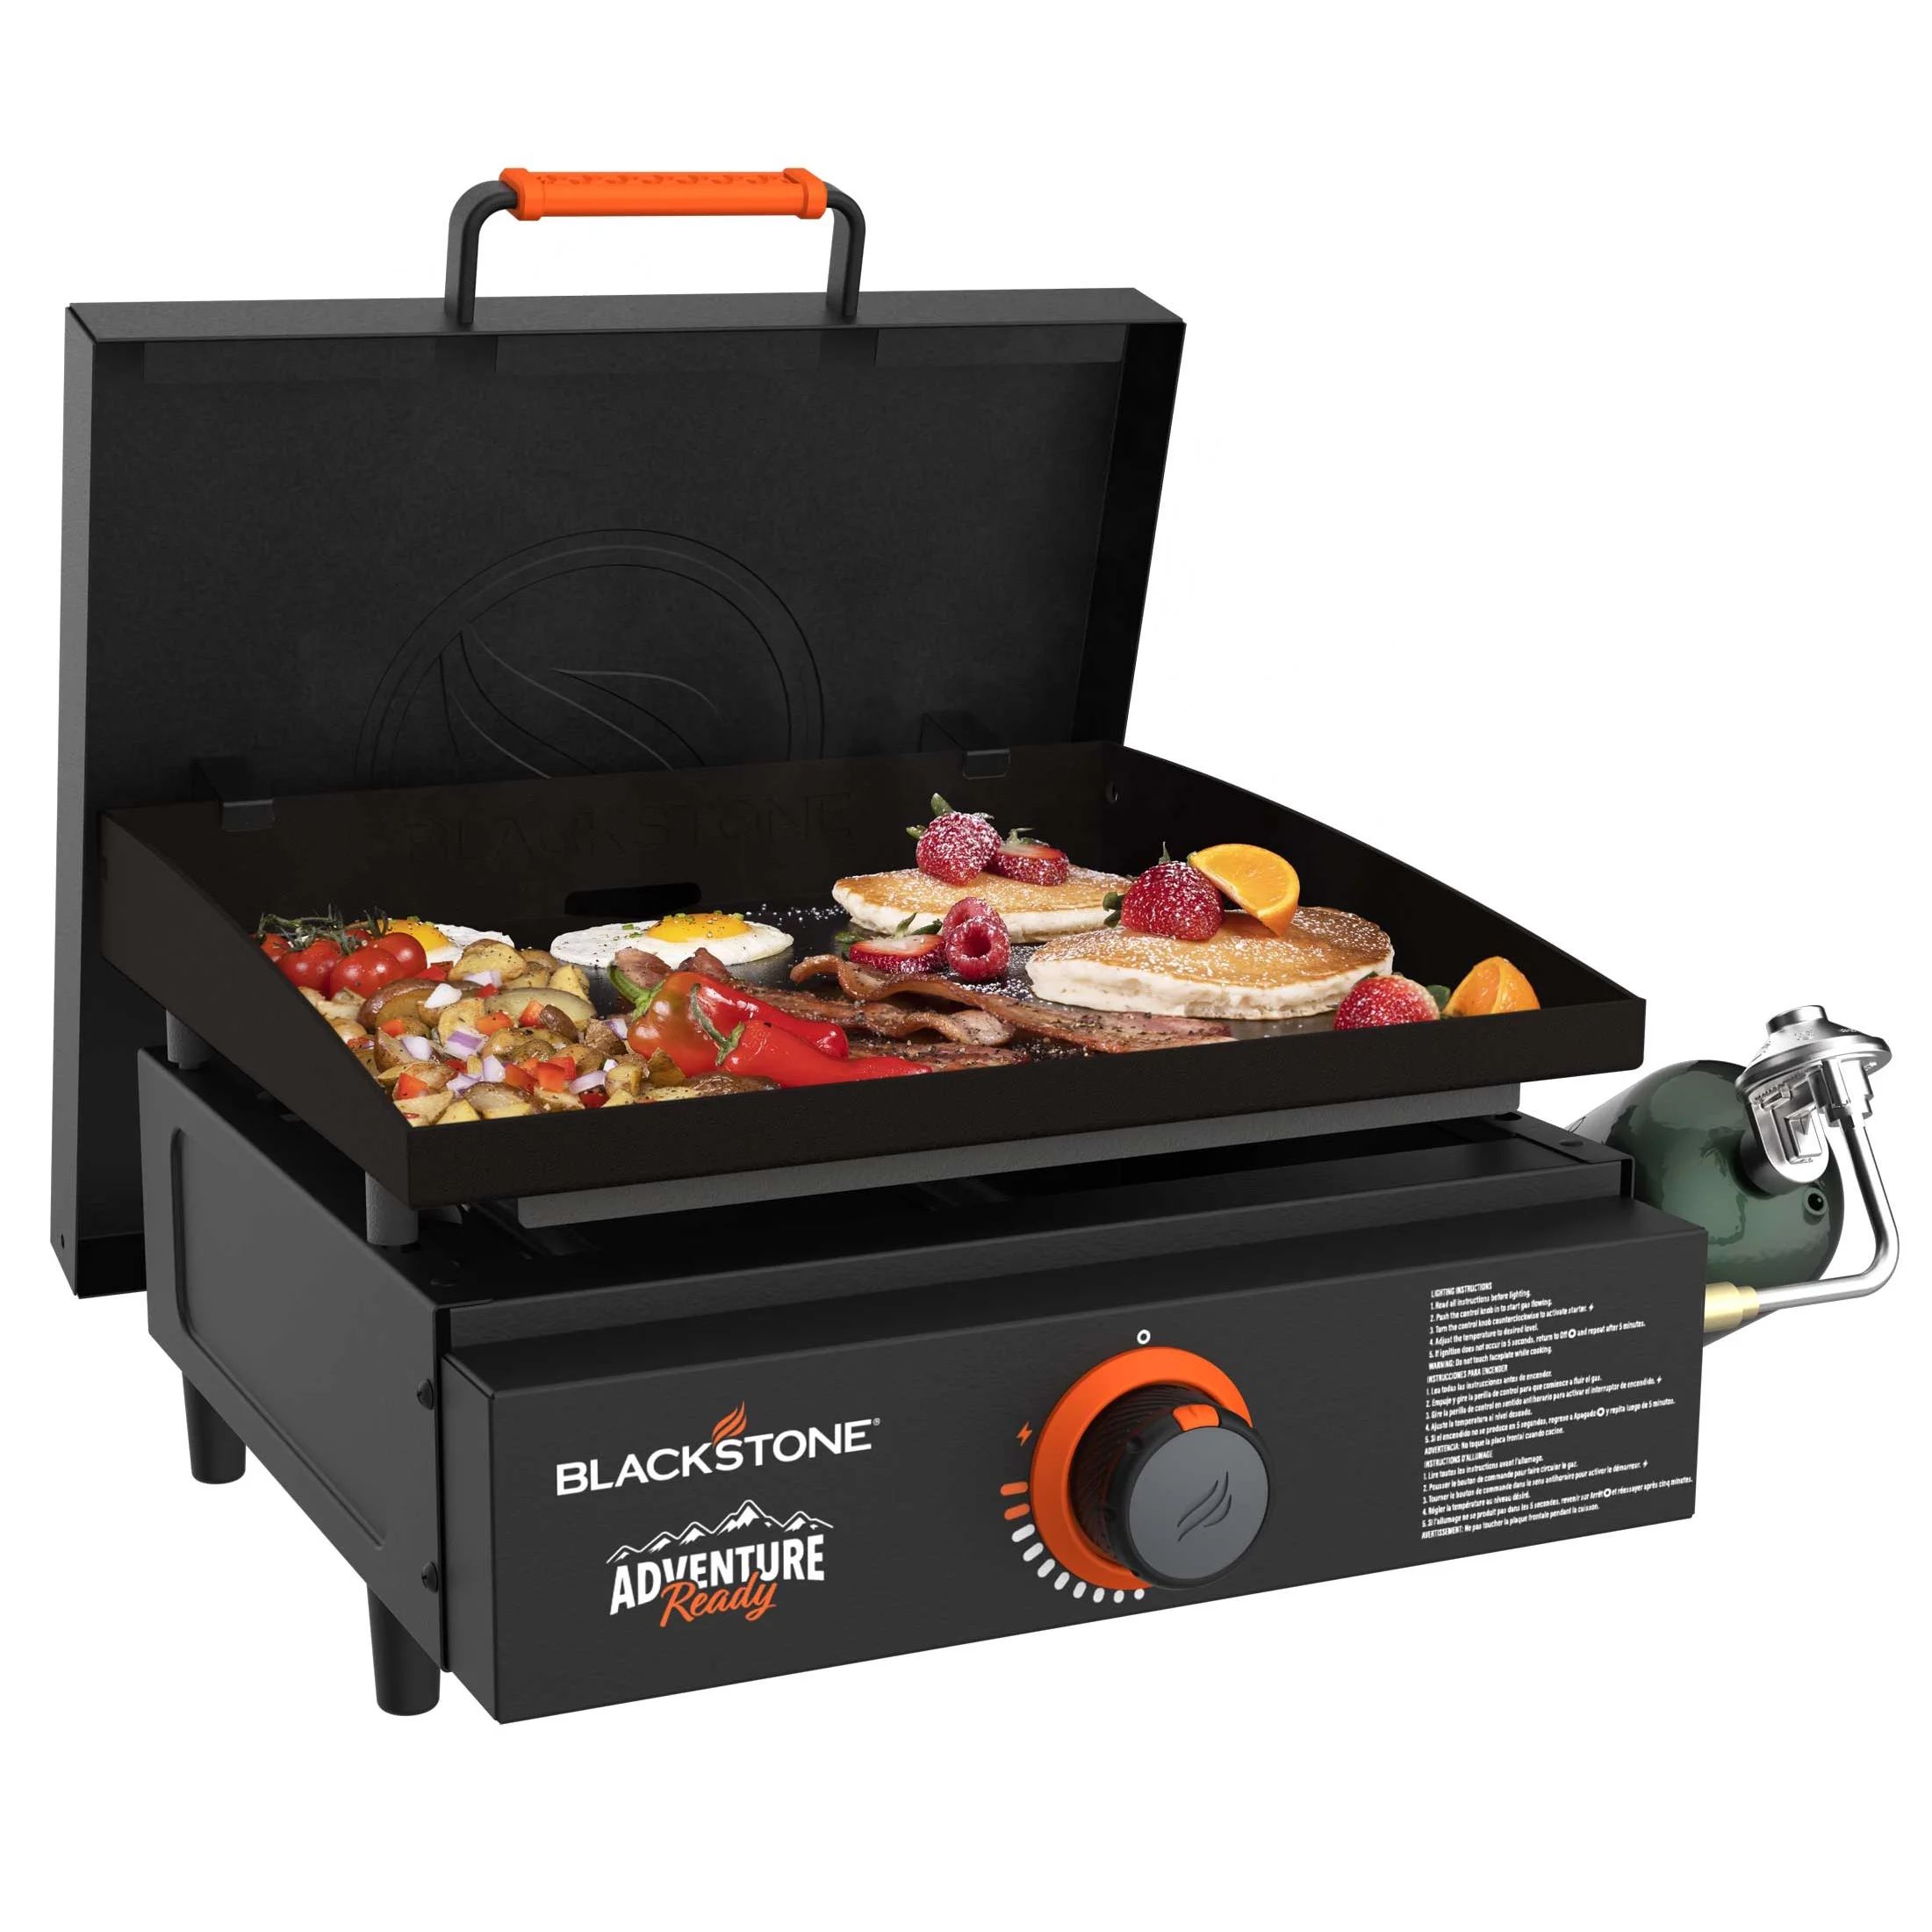 Blackstone Adventure Ready 17” Propane Griddle with Hard Cover | Walmart (US)